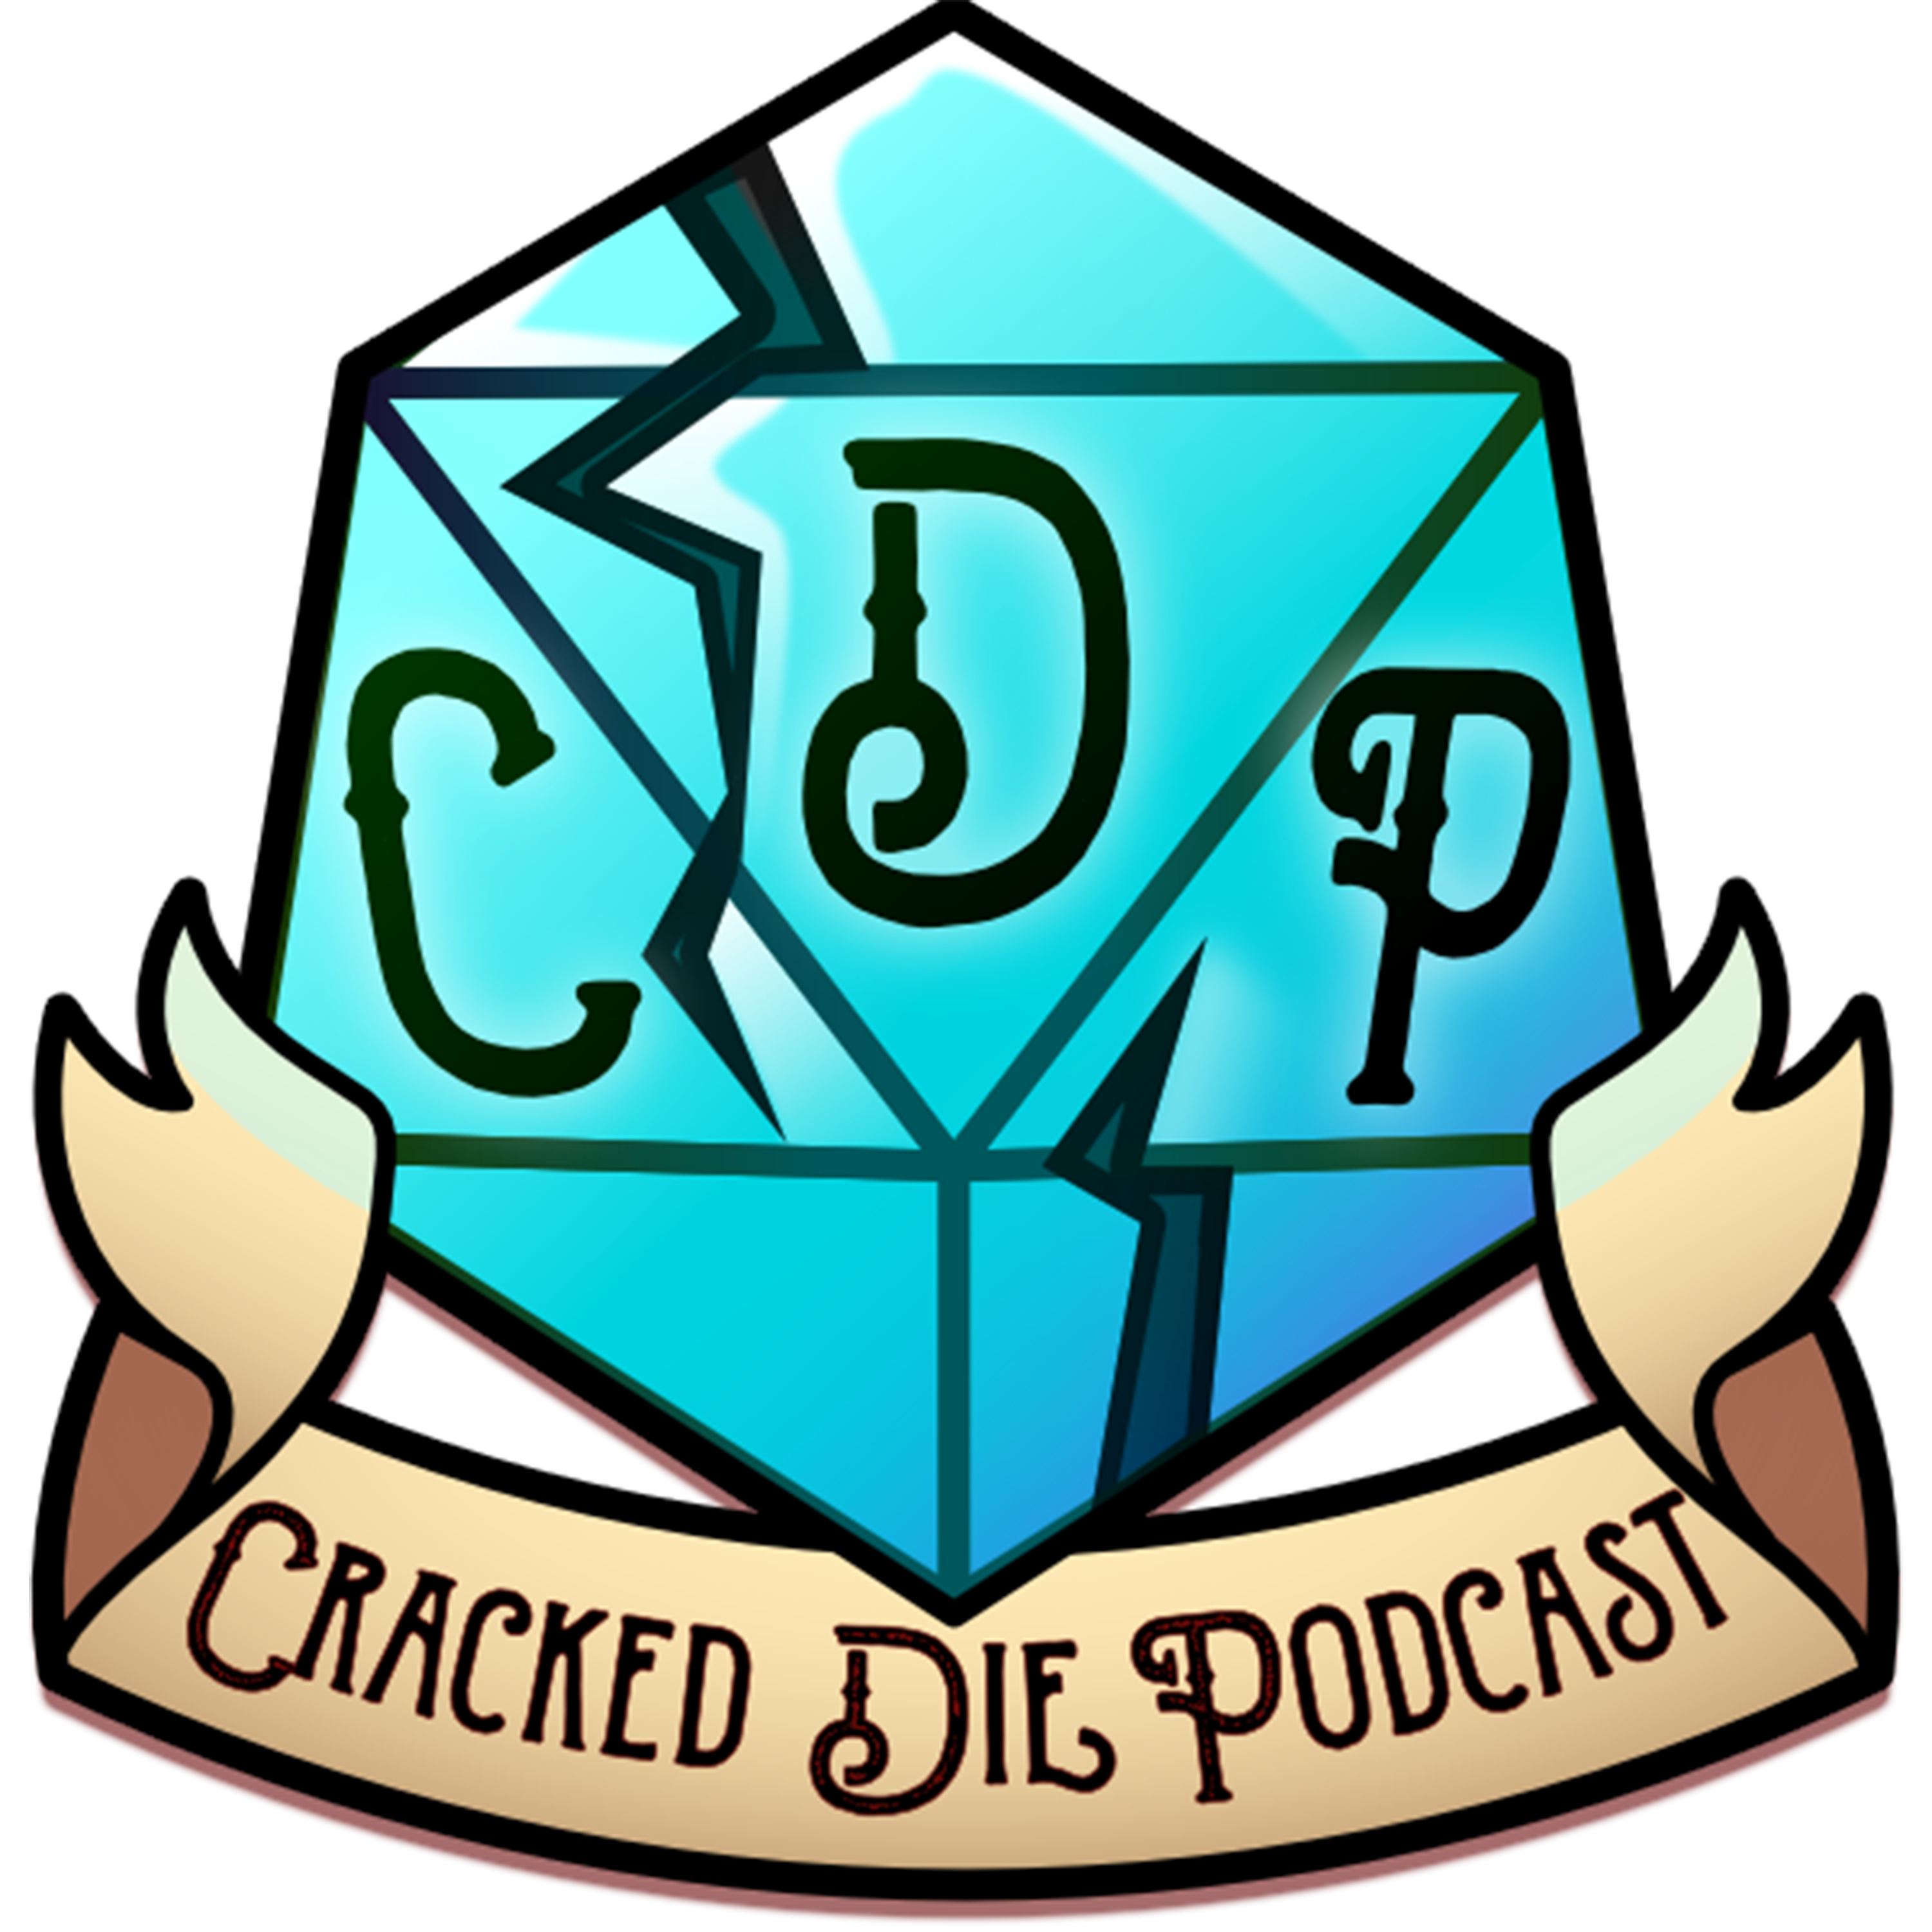 The Cracked Die Podcast - Episode 173 - You Say That The Battle Is Over